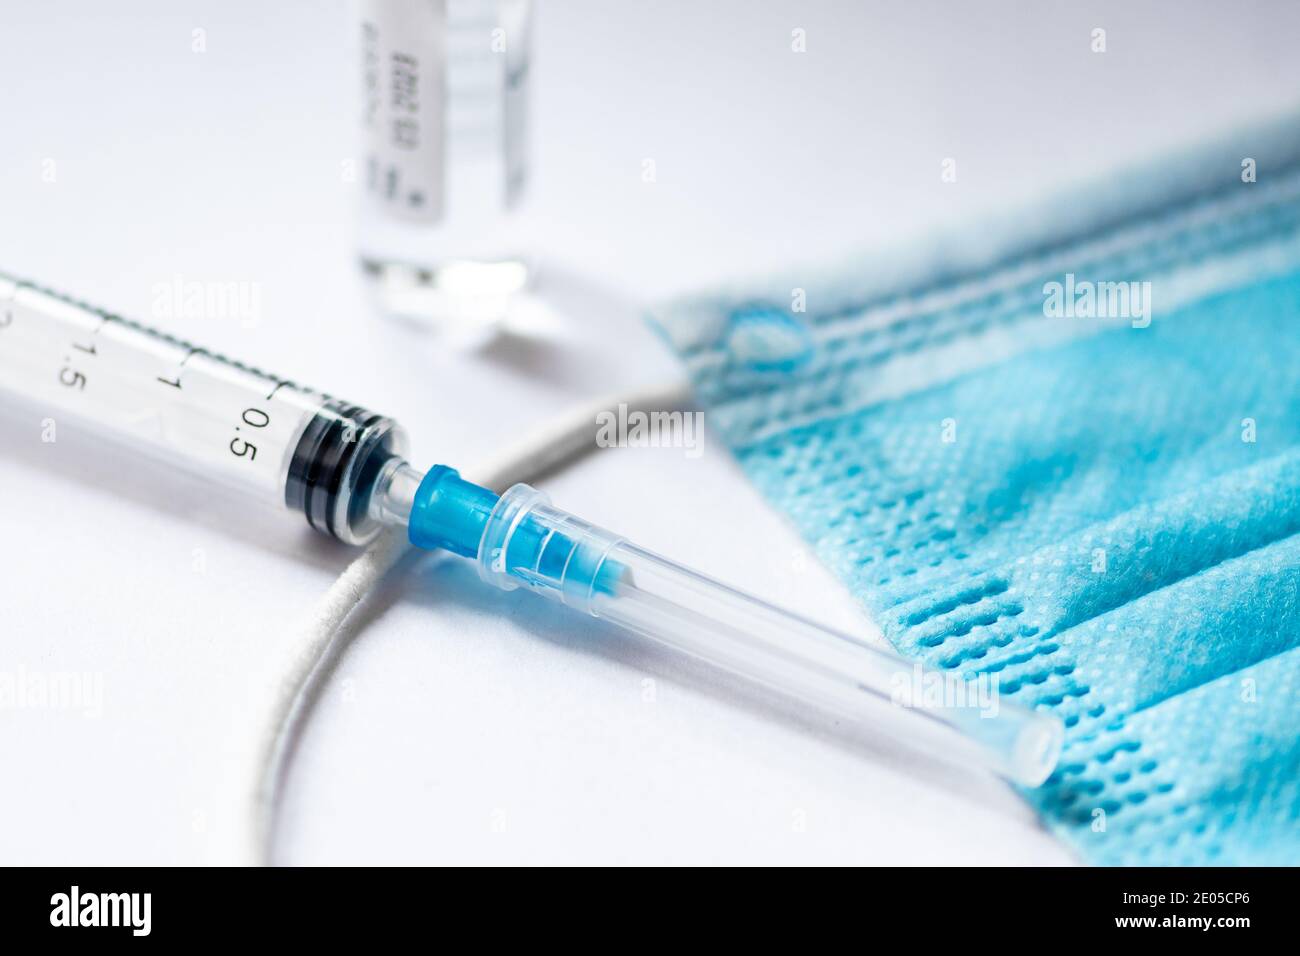 Syringe, vial and surgical face mask on a table ready to be used. Covid or Coronavirus vaccine background Stock Photo